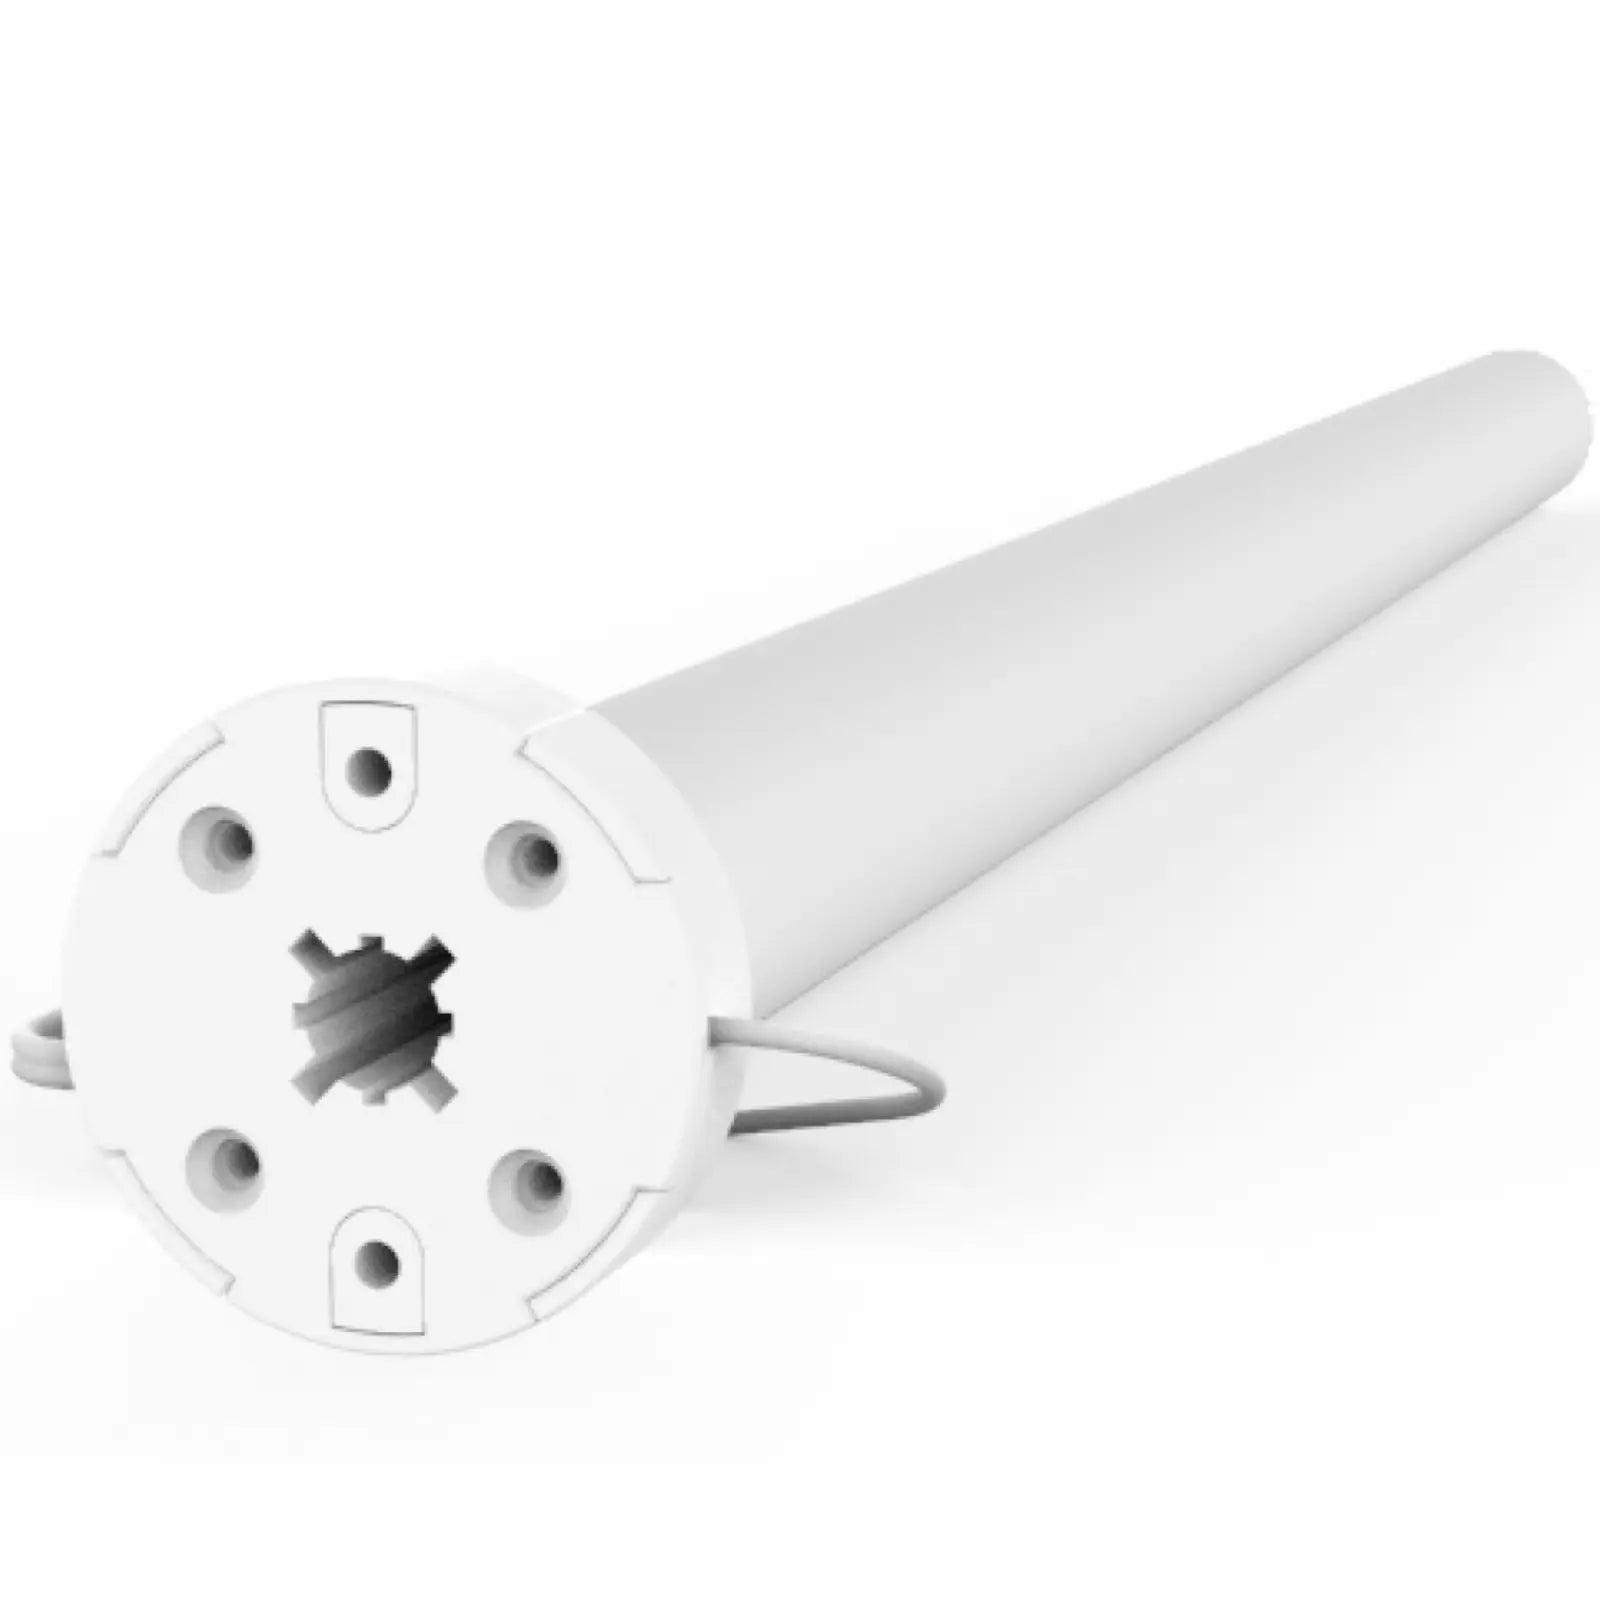 Rollease Automate WireFree Li-ion 1.1 Roller Shade Motor